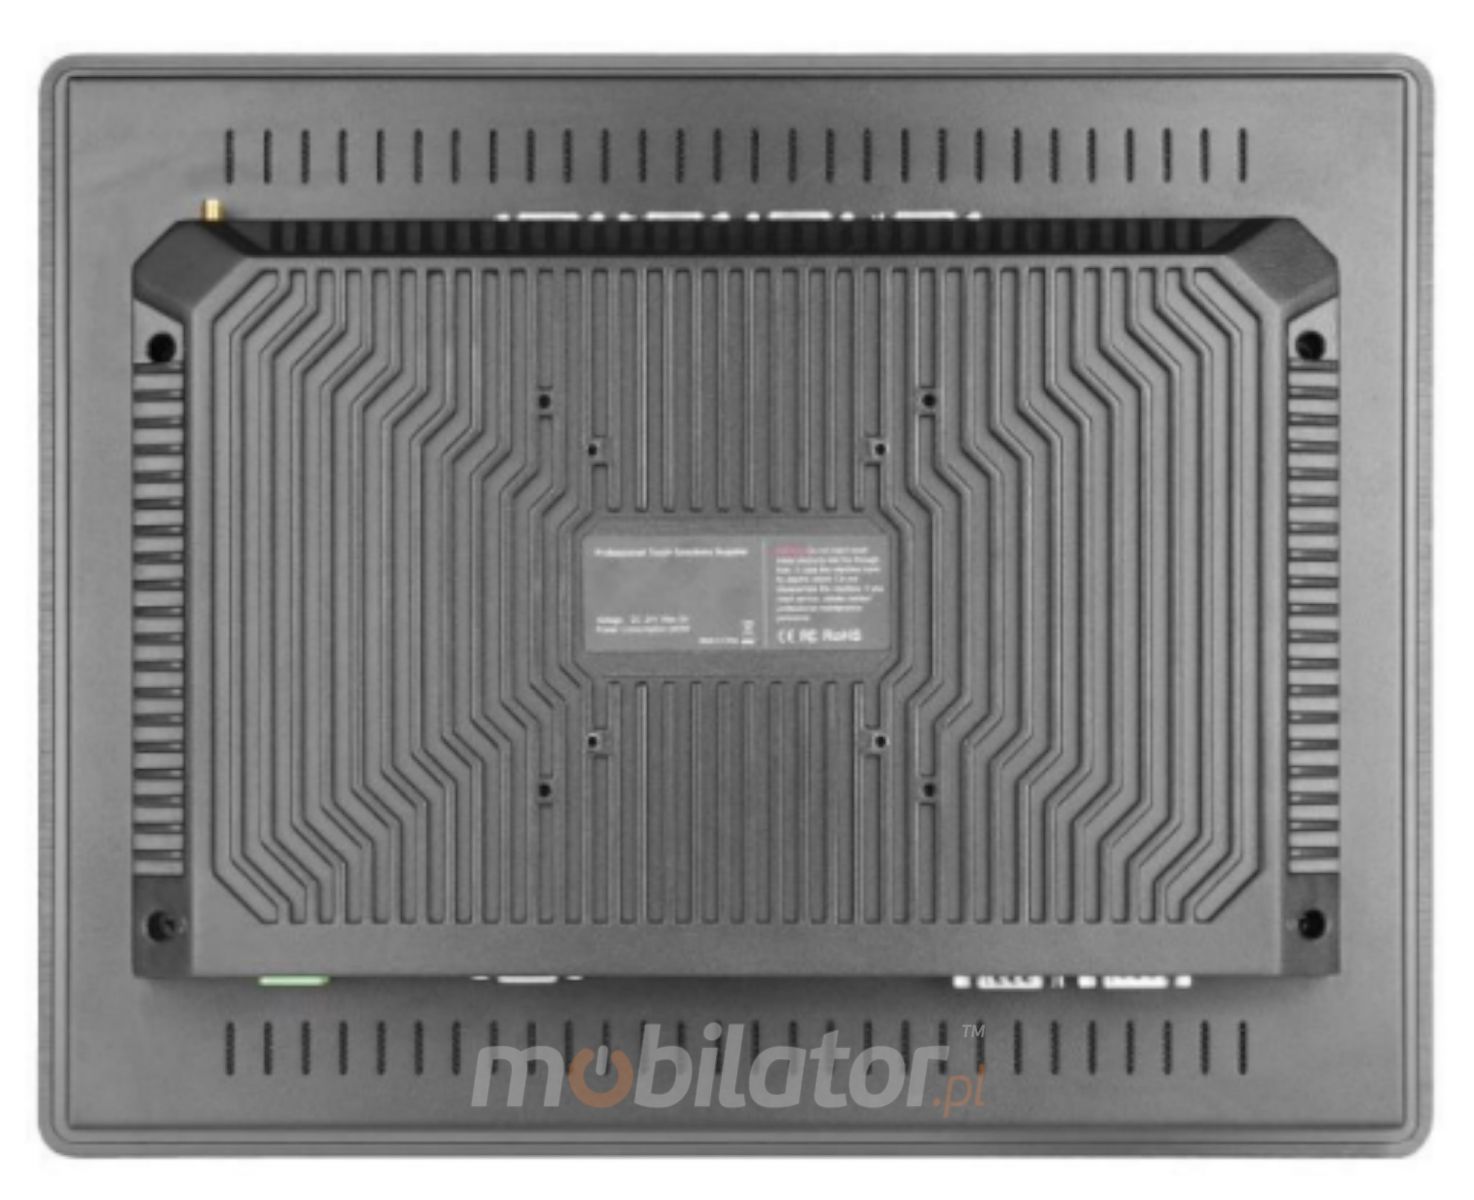 simple metal housing in panel BIBOX-170PC2 Option for passive cooling